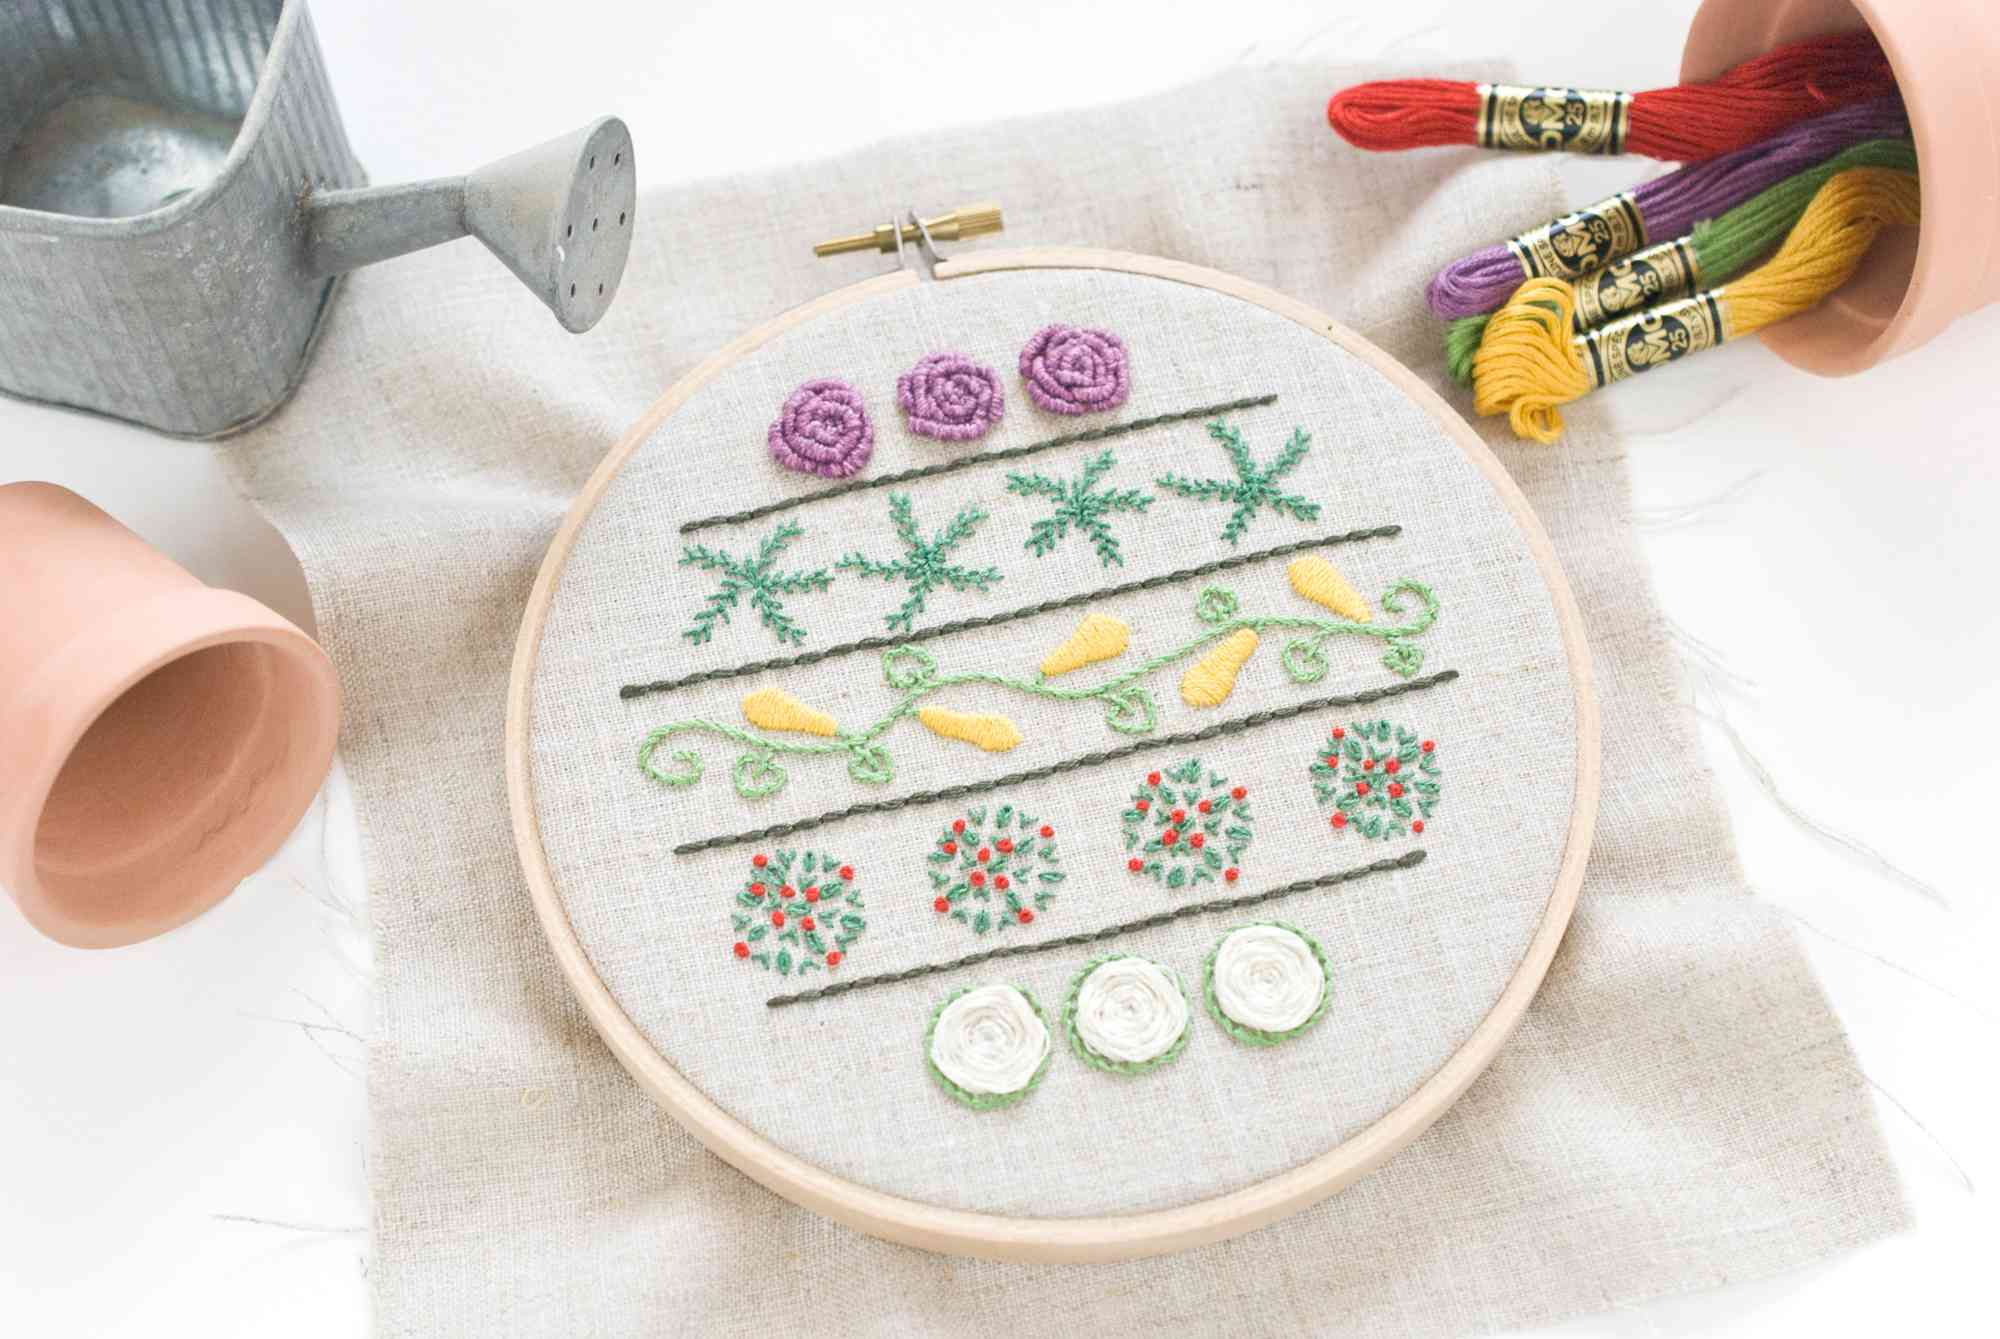 Kids Embroidery Patterns Our Top 25 Free Embroidery Designs